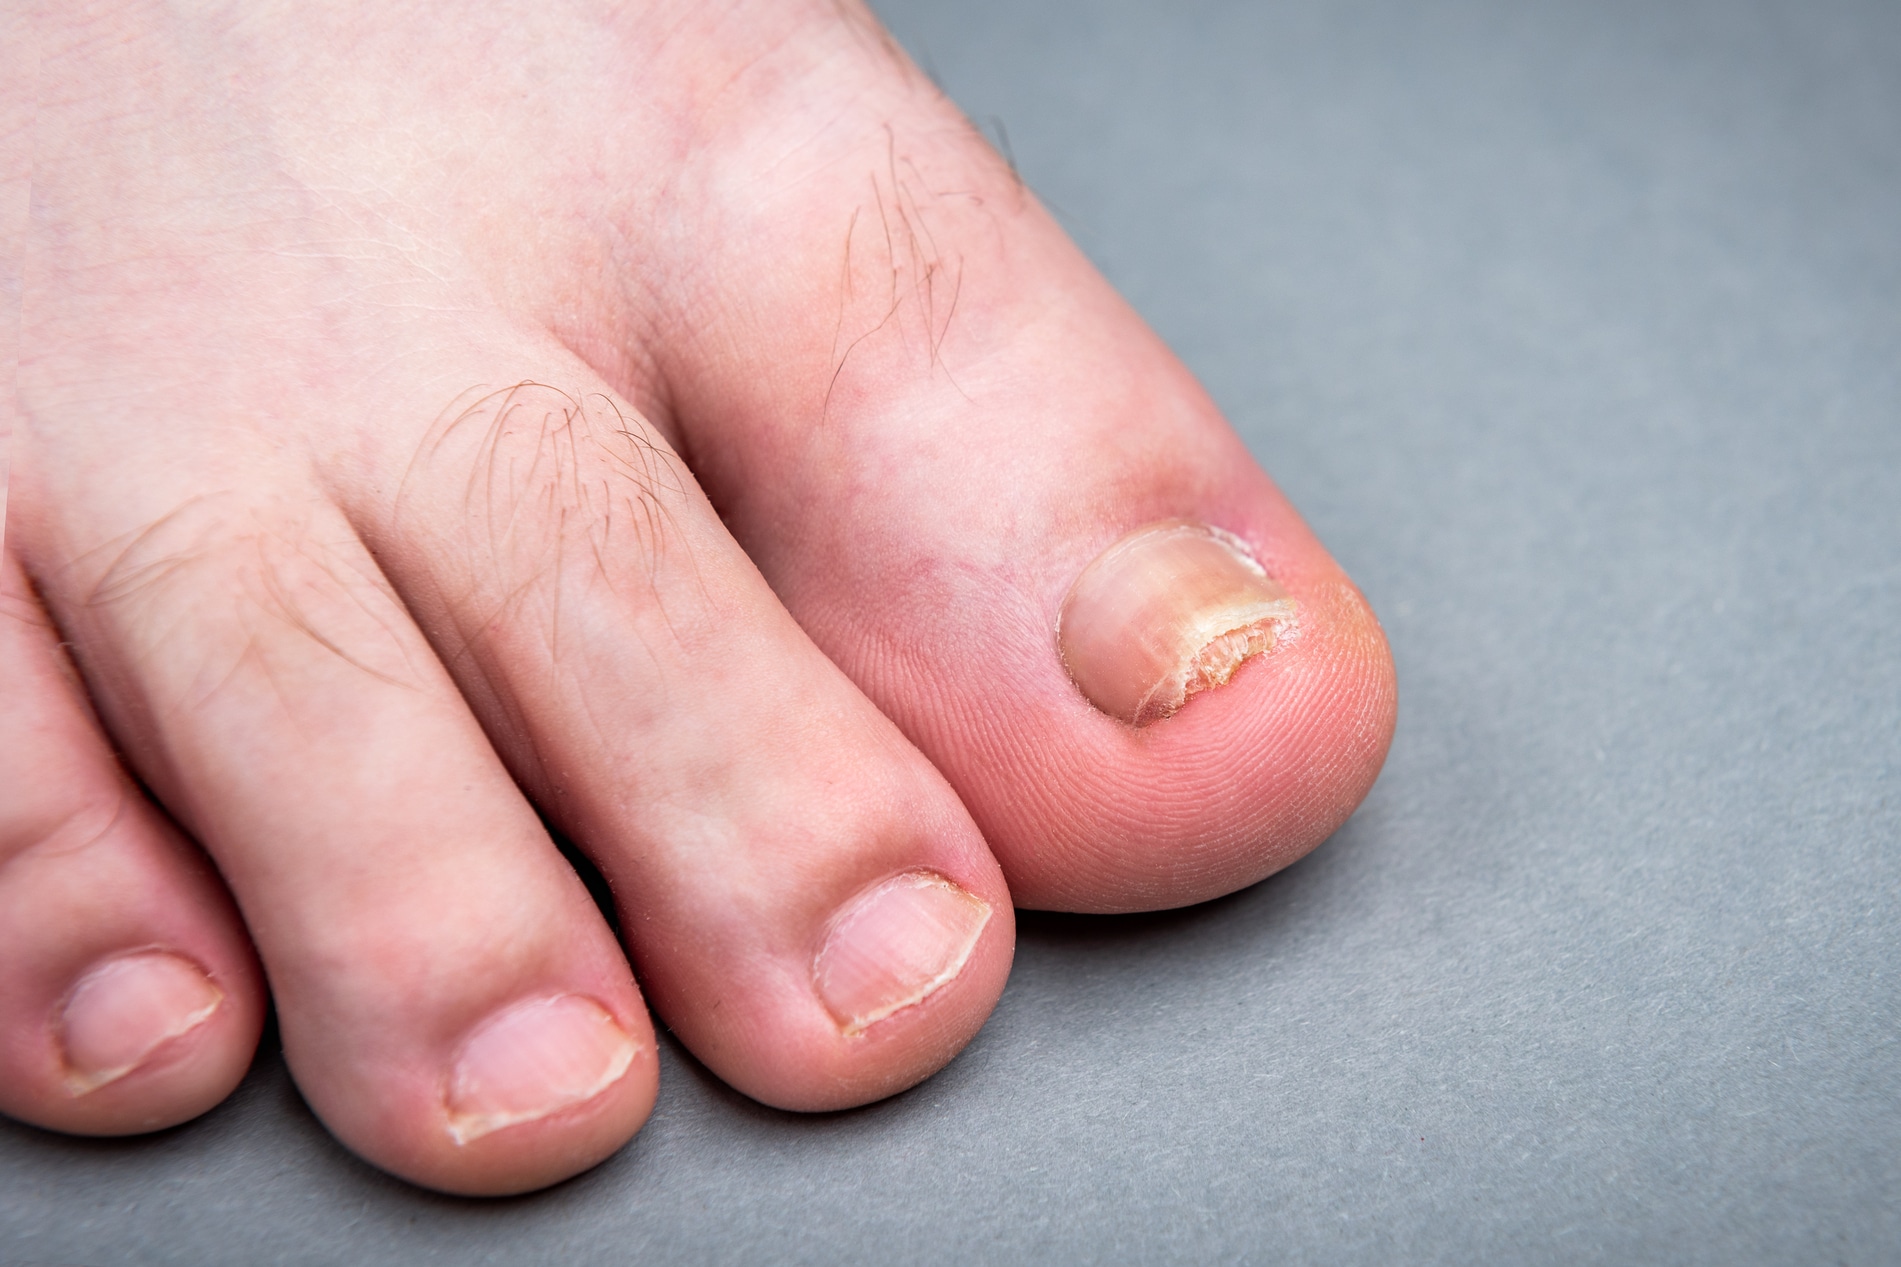 Male Laser Nail Fungal Infection Treatment In London | Jimmybodur